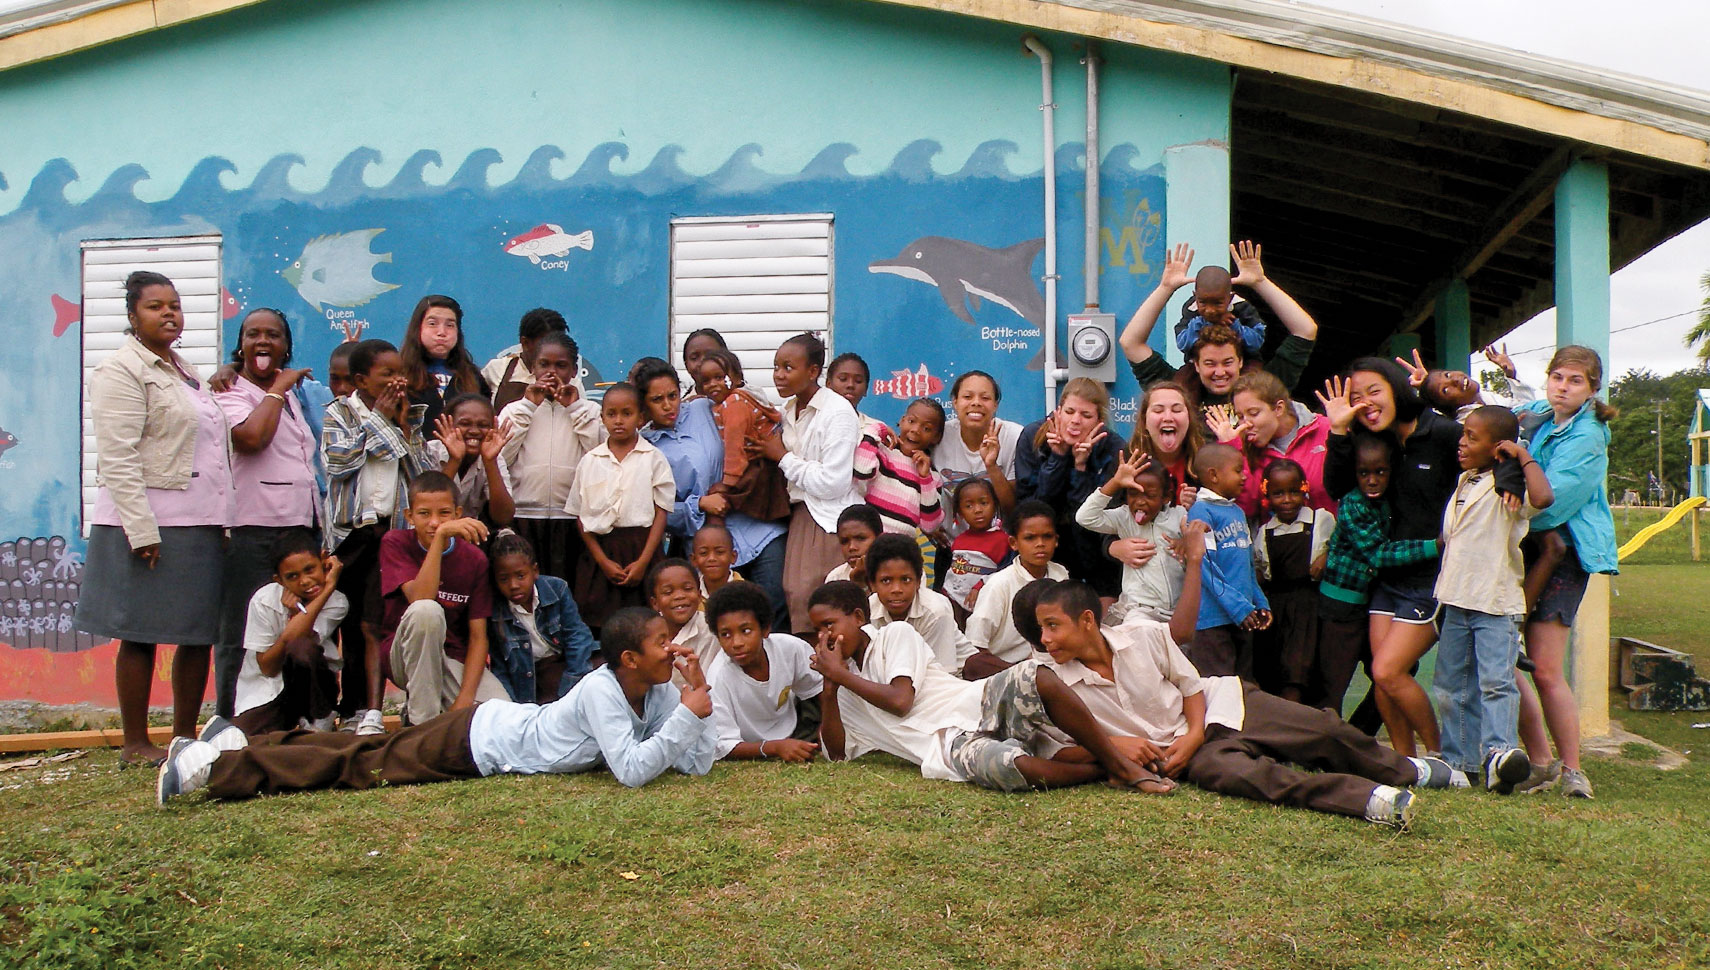 Hillery (right of center) traveled to Belize in winter 2011 with Students for Belize Education to work with communities there.